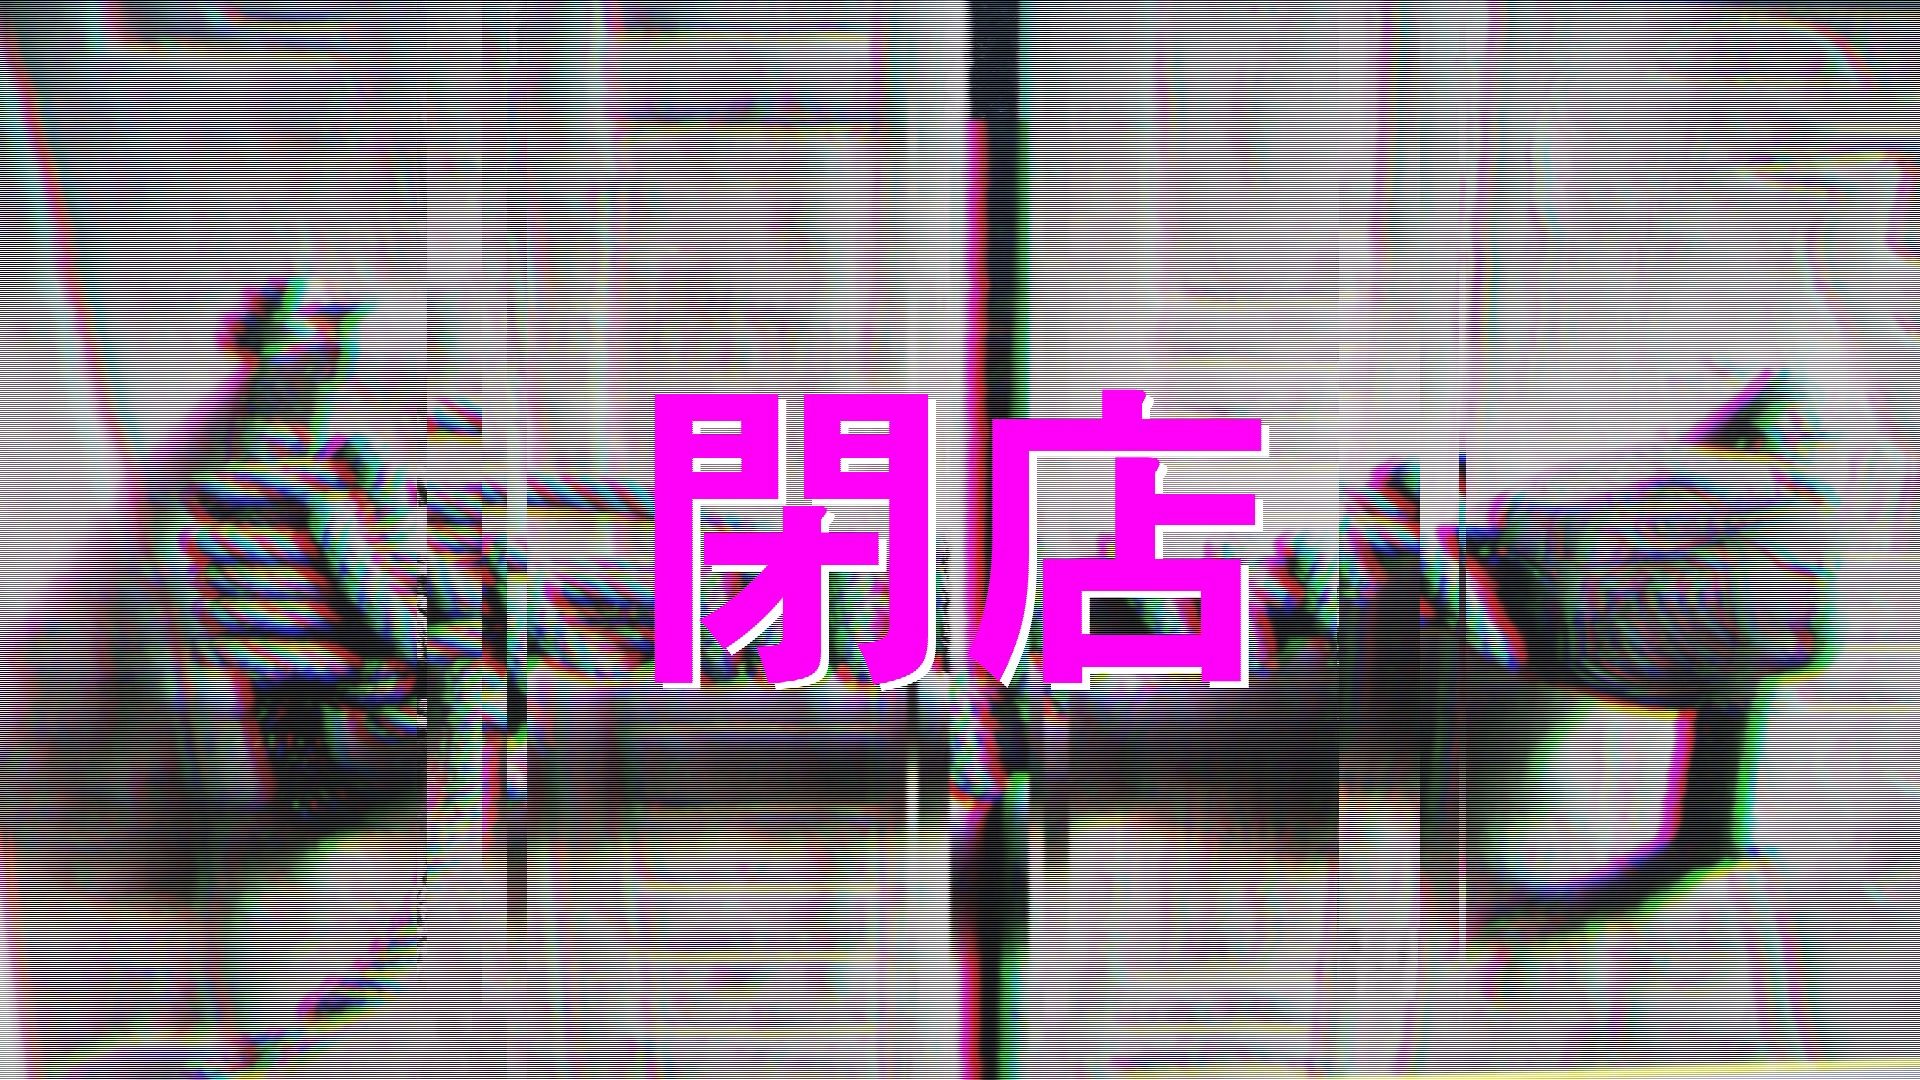 A glitched image of a person opening a door with the text 